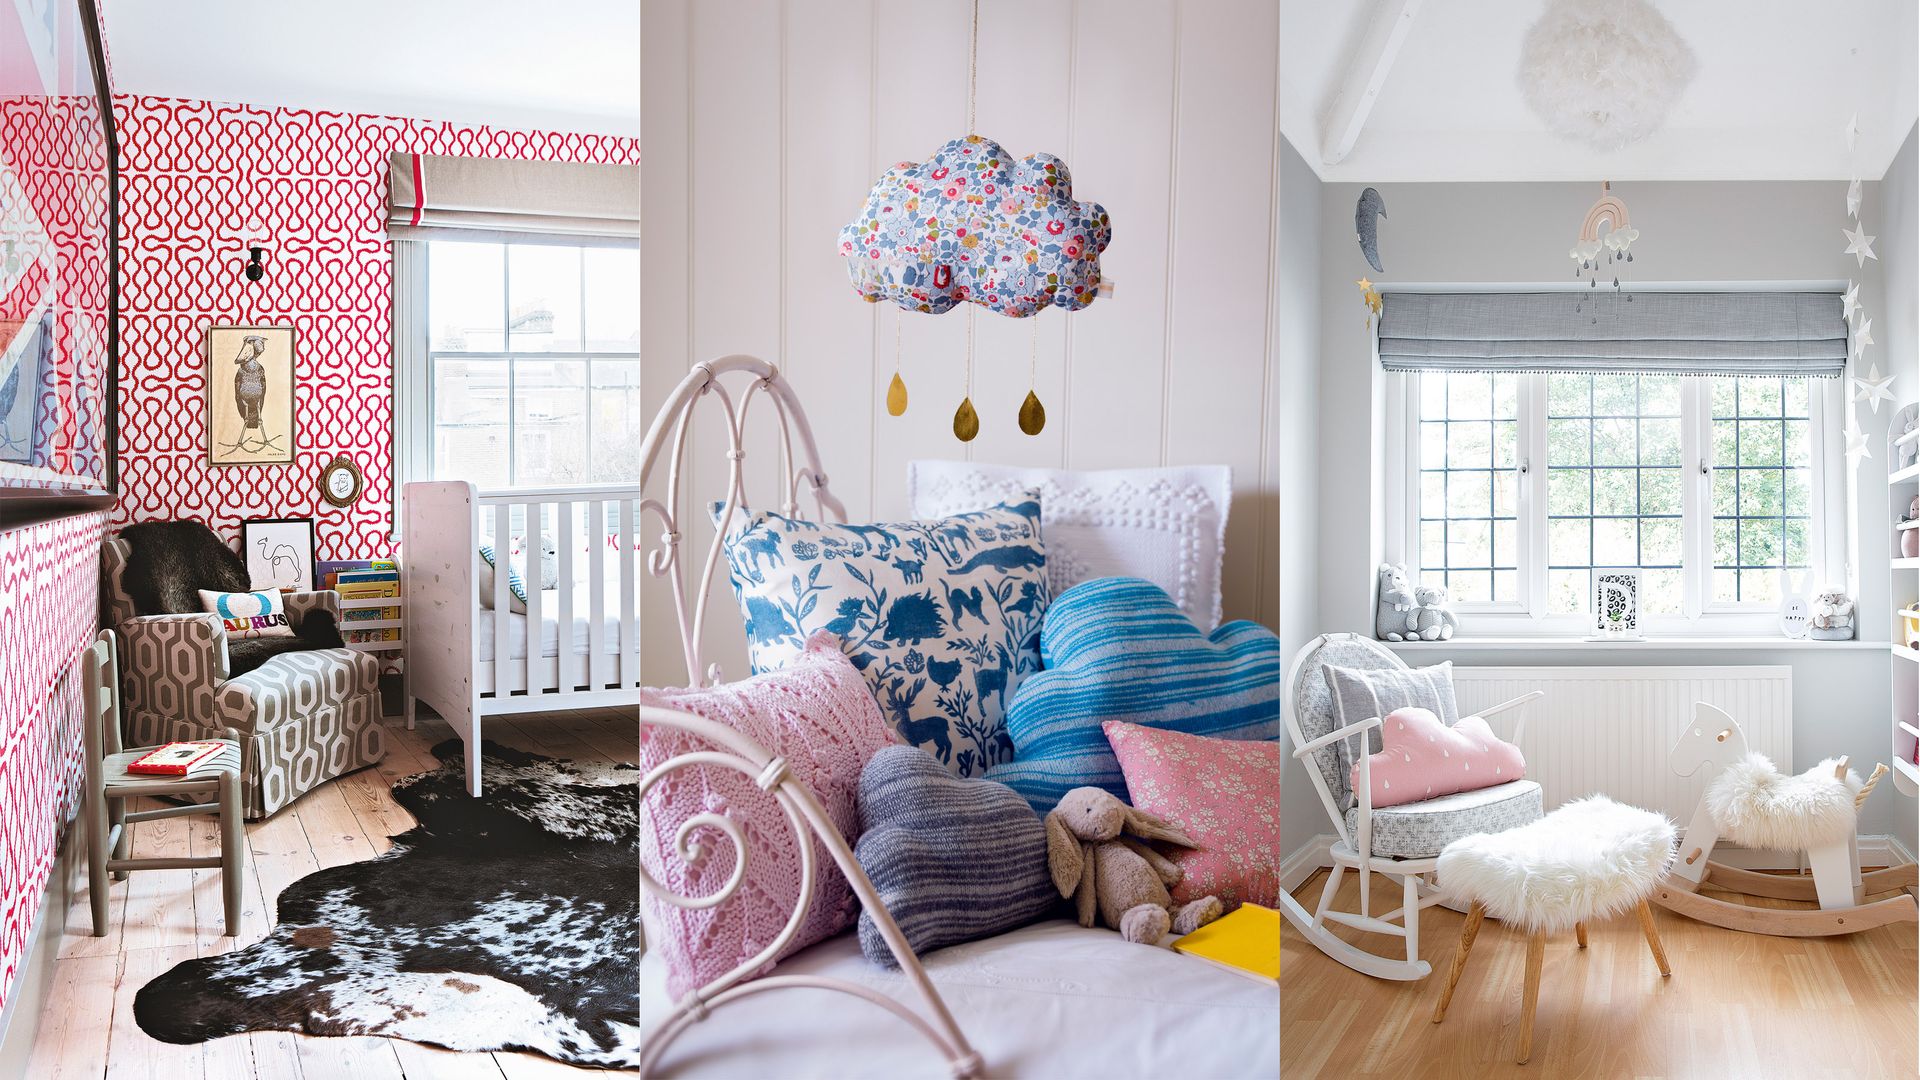 <p>                     Few interior design jobs are more exciting than dreaming up baby girl nursery ideas.                   </p>                                      <p>                     Creating a special space for a new arrival is an important ritual for many parents, particularly because coming up with bedrooms for a newborn takes a little bit of extra thinking.                   </p>                                      <p>                     Preparing a room for their earliest months means thinking practically as well as stylishly, but also being conscious of creating a cozy environment that both baby and parents enjoy spending time in.                   </p>